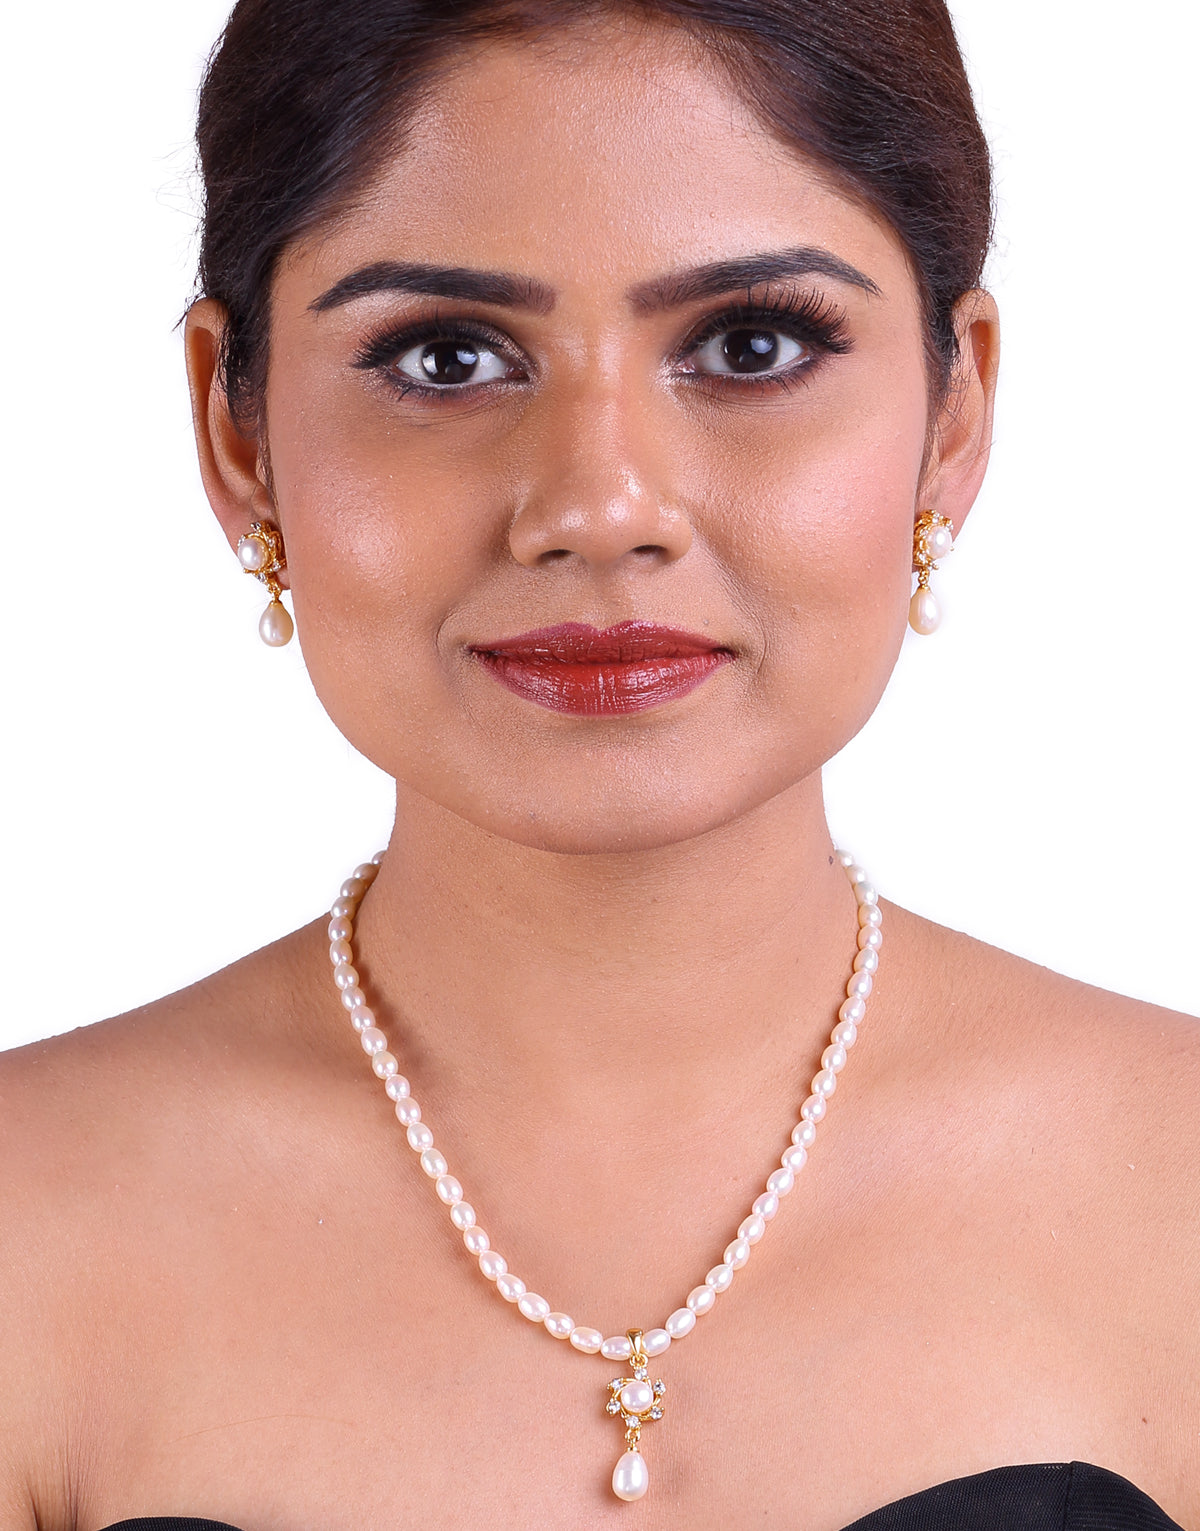 Oval Shaped Beaded Pearl Neckalce With Drop Shaped Dangled Pearls